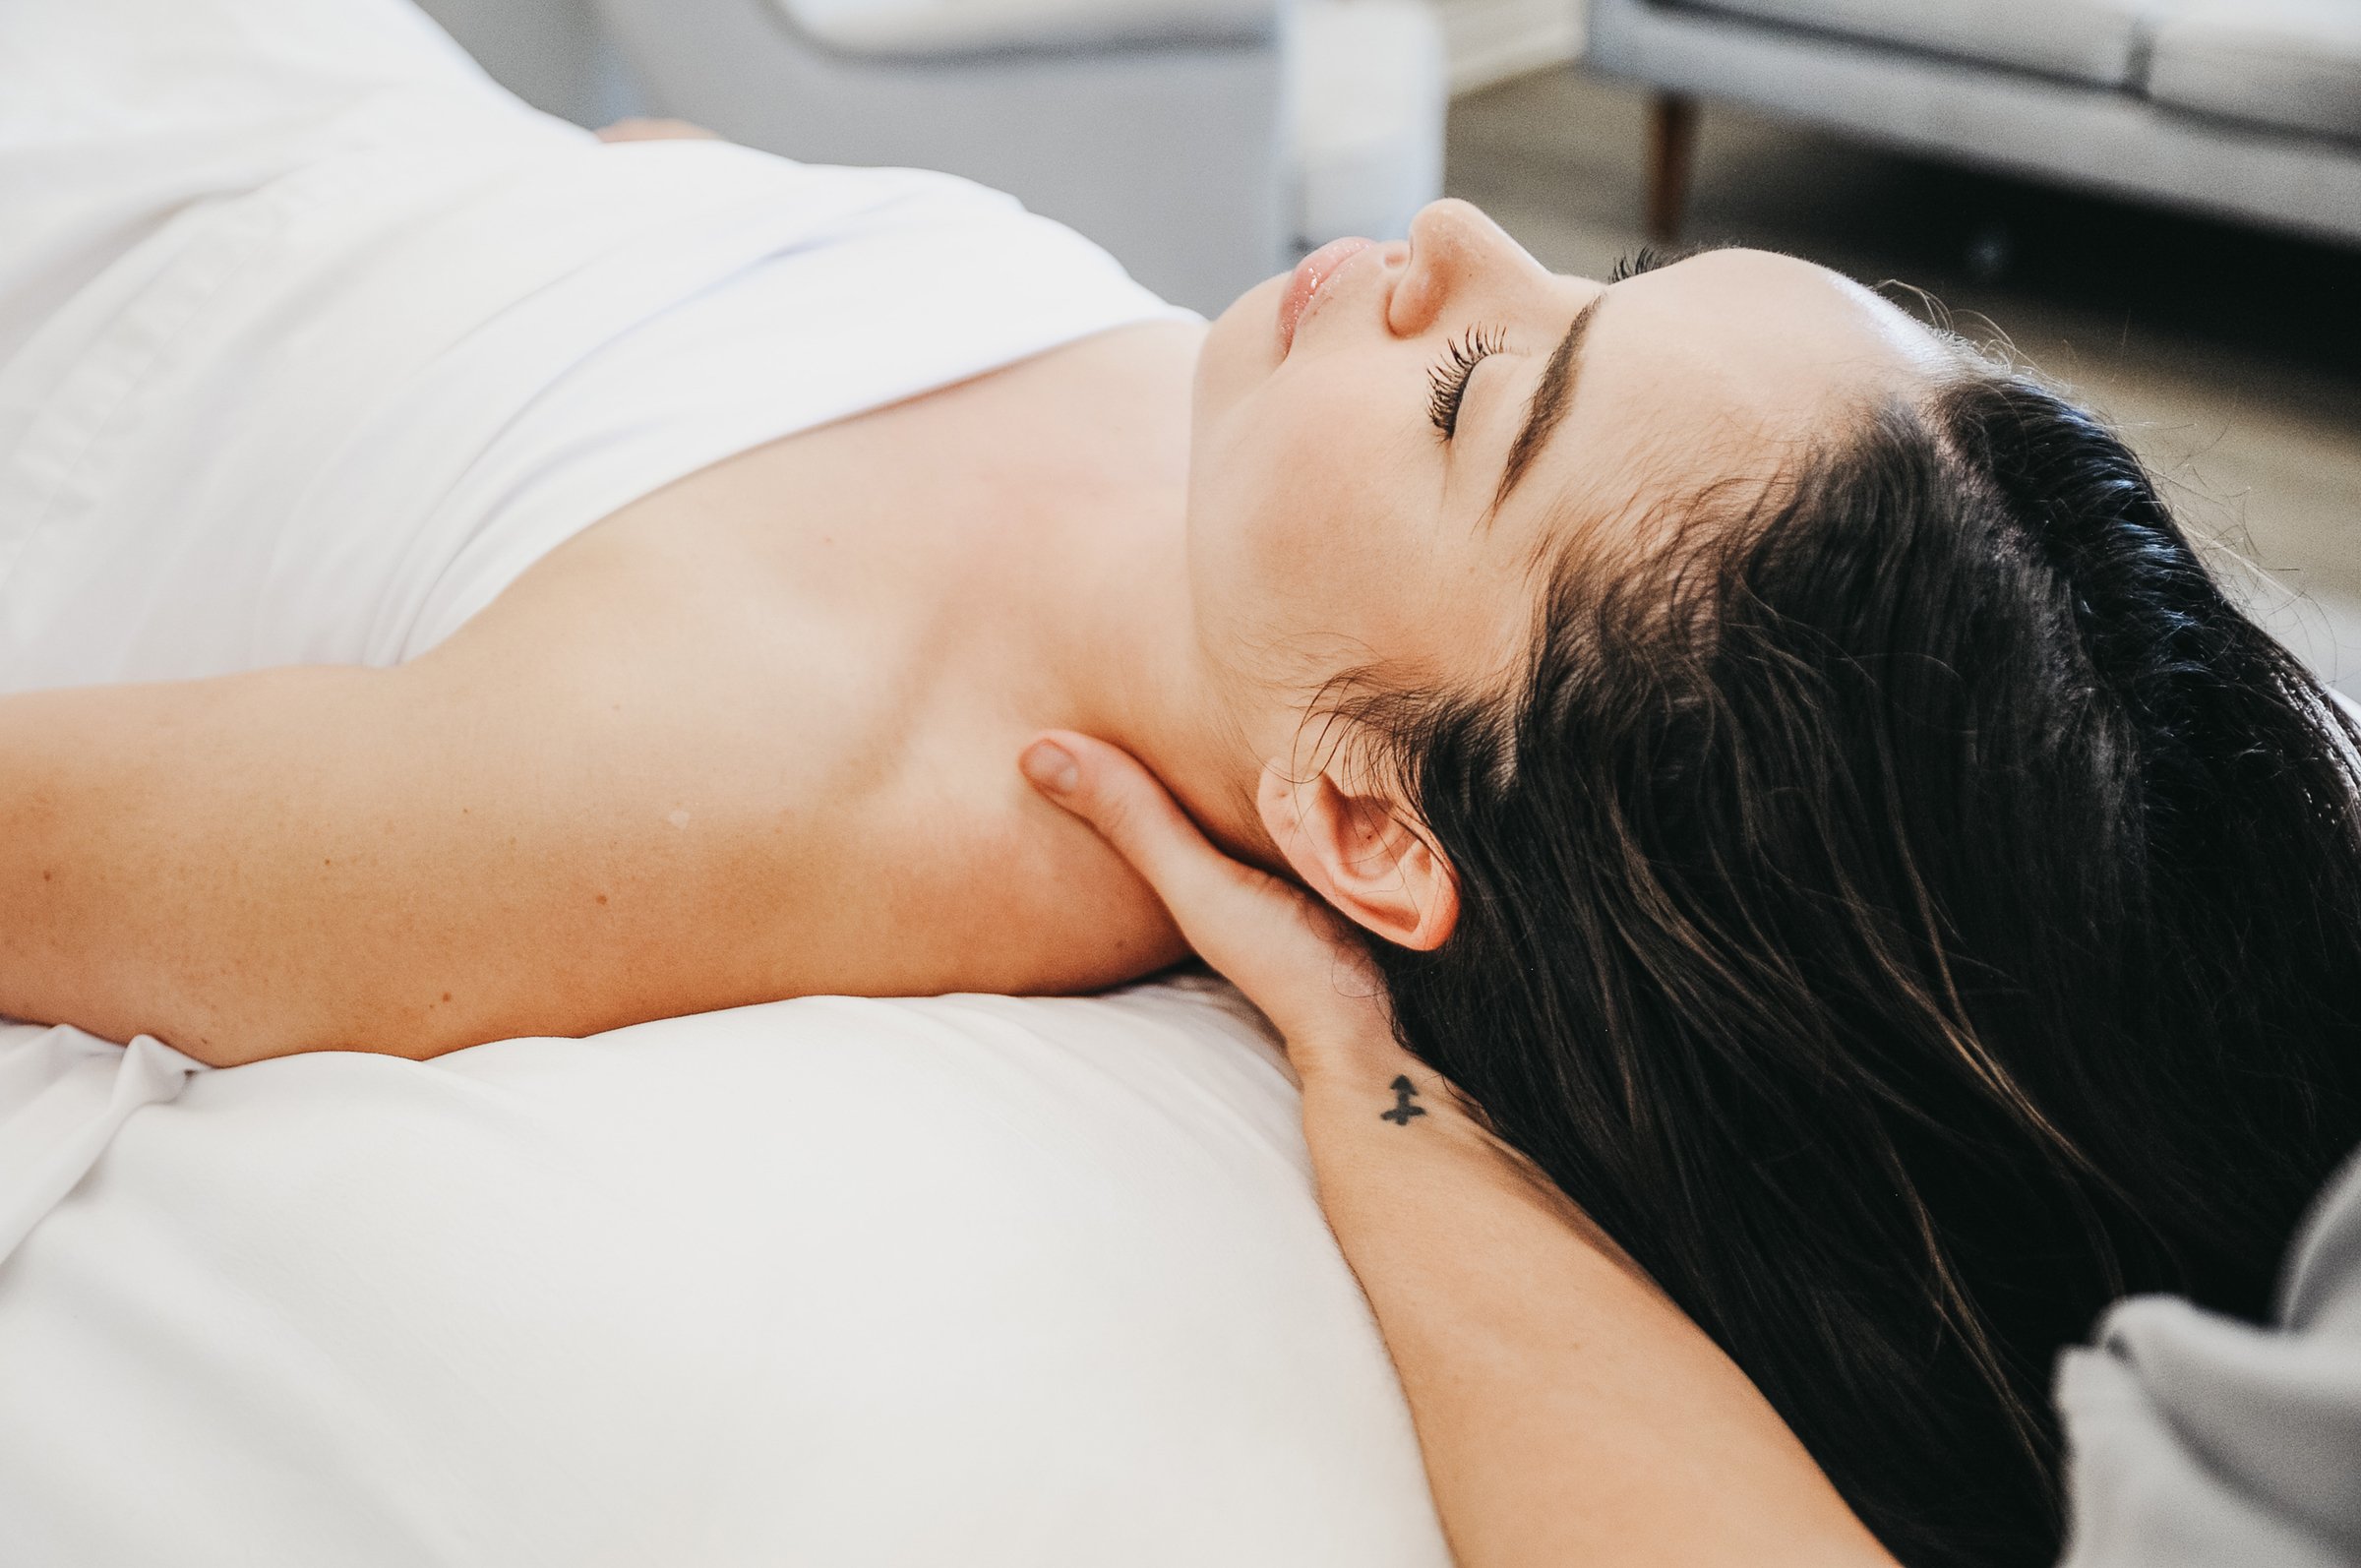 Relaxing Neck and Shoulder Massage In Fertility Massage Session